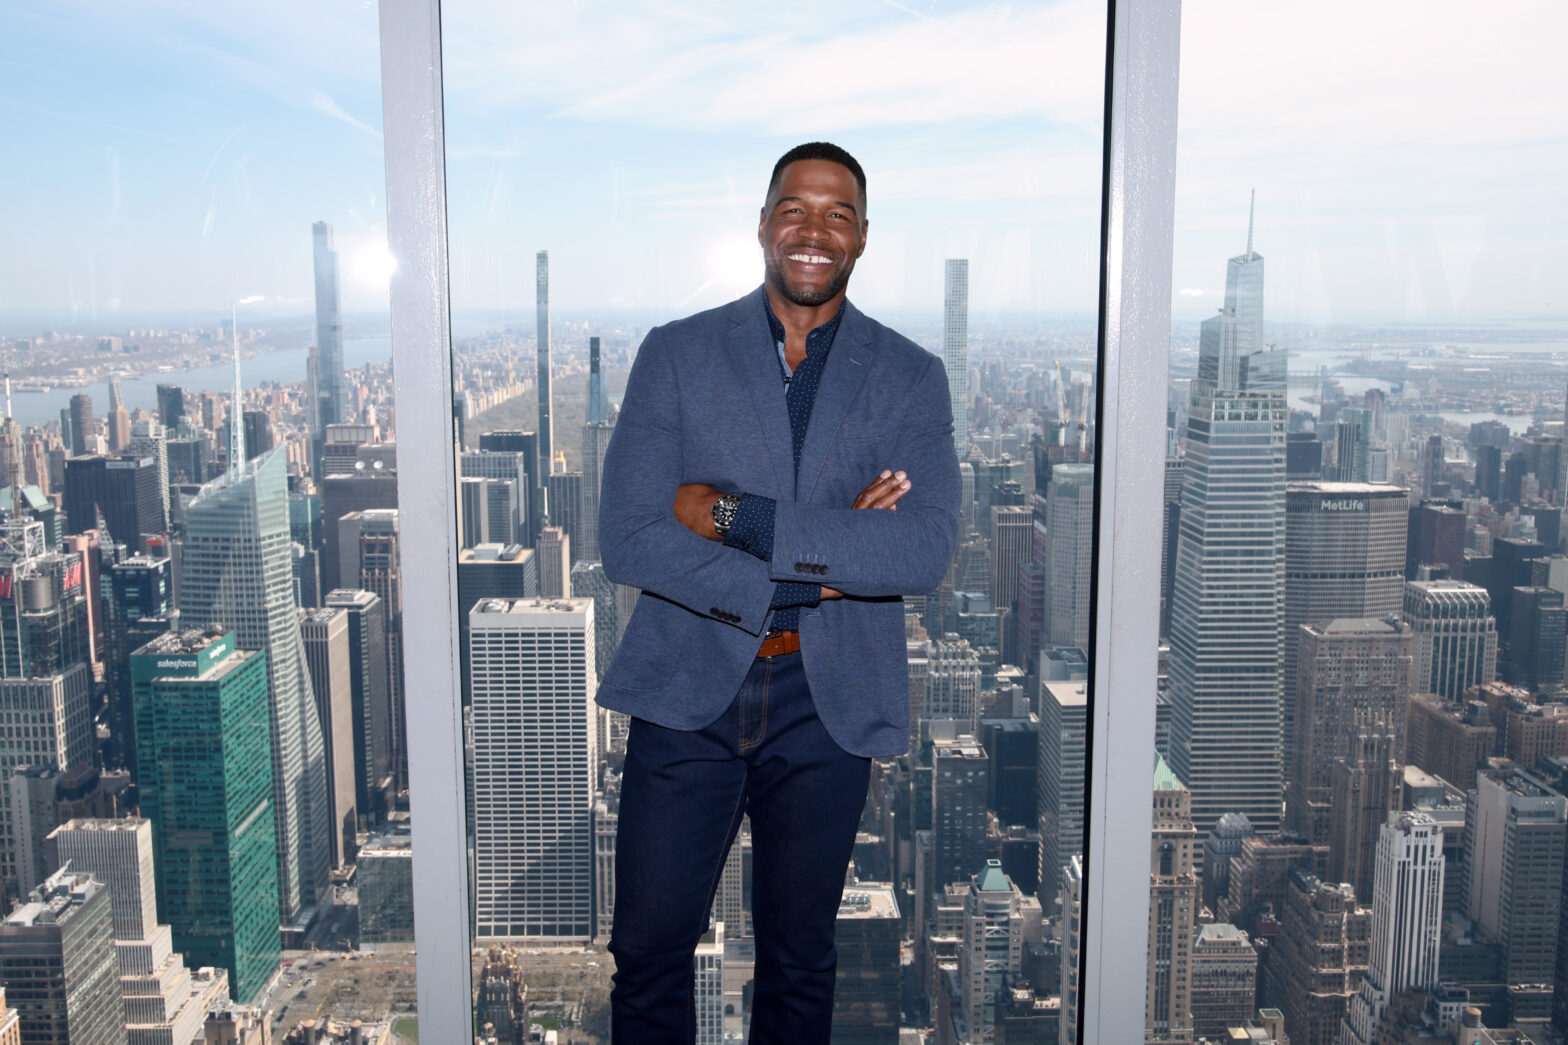 NFL Legend Michael Strahan's Skincare Products are Perfect for the Traveling Man